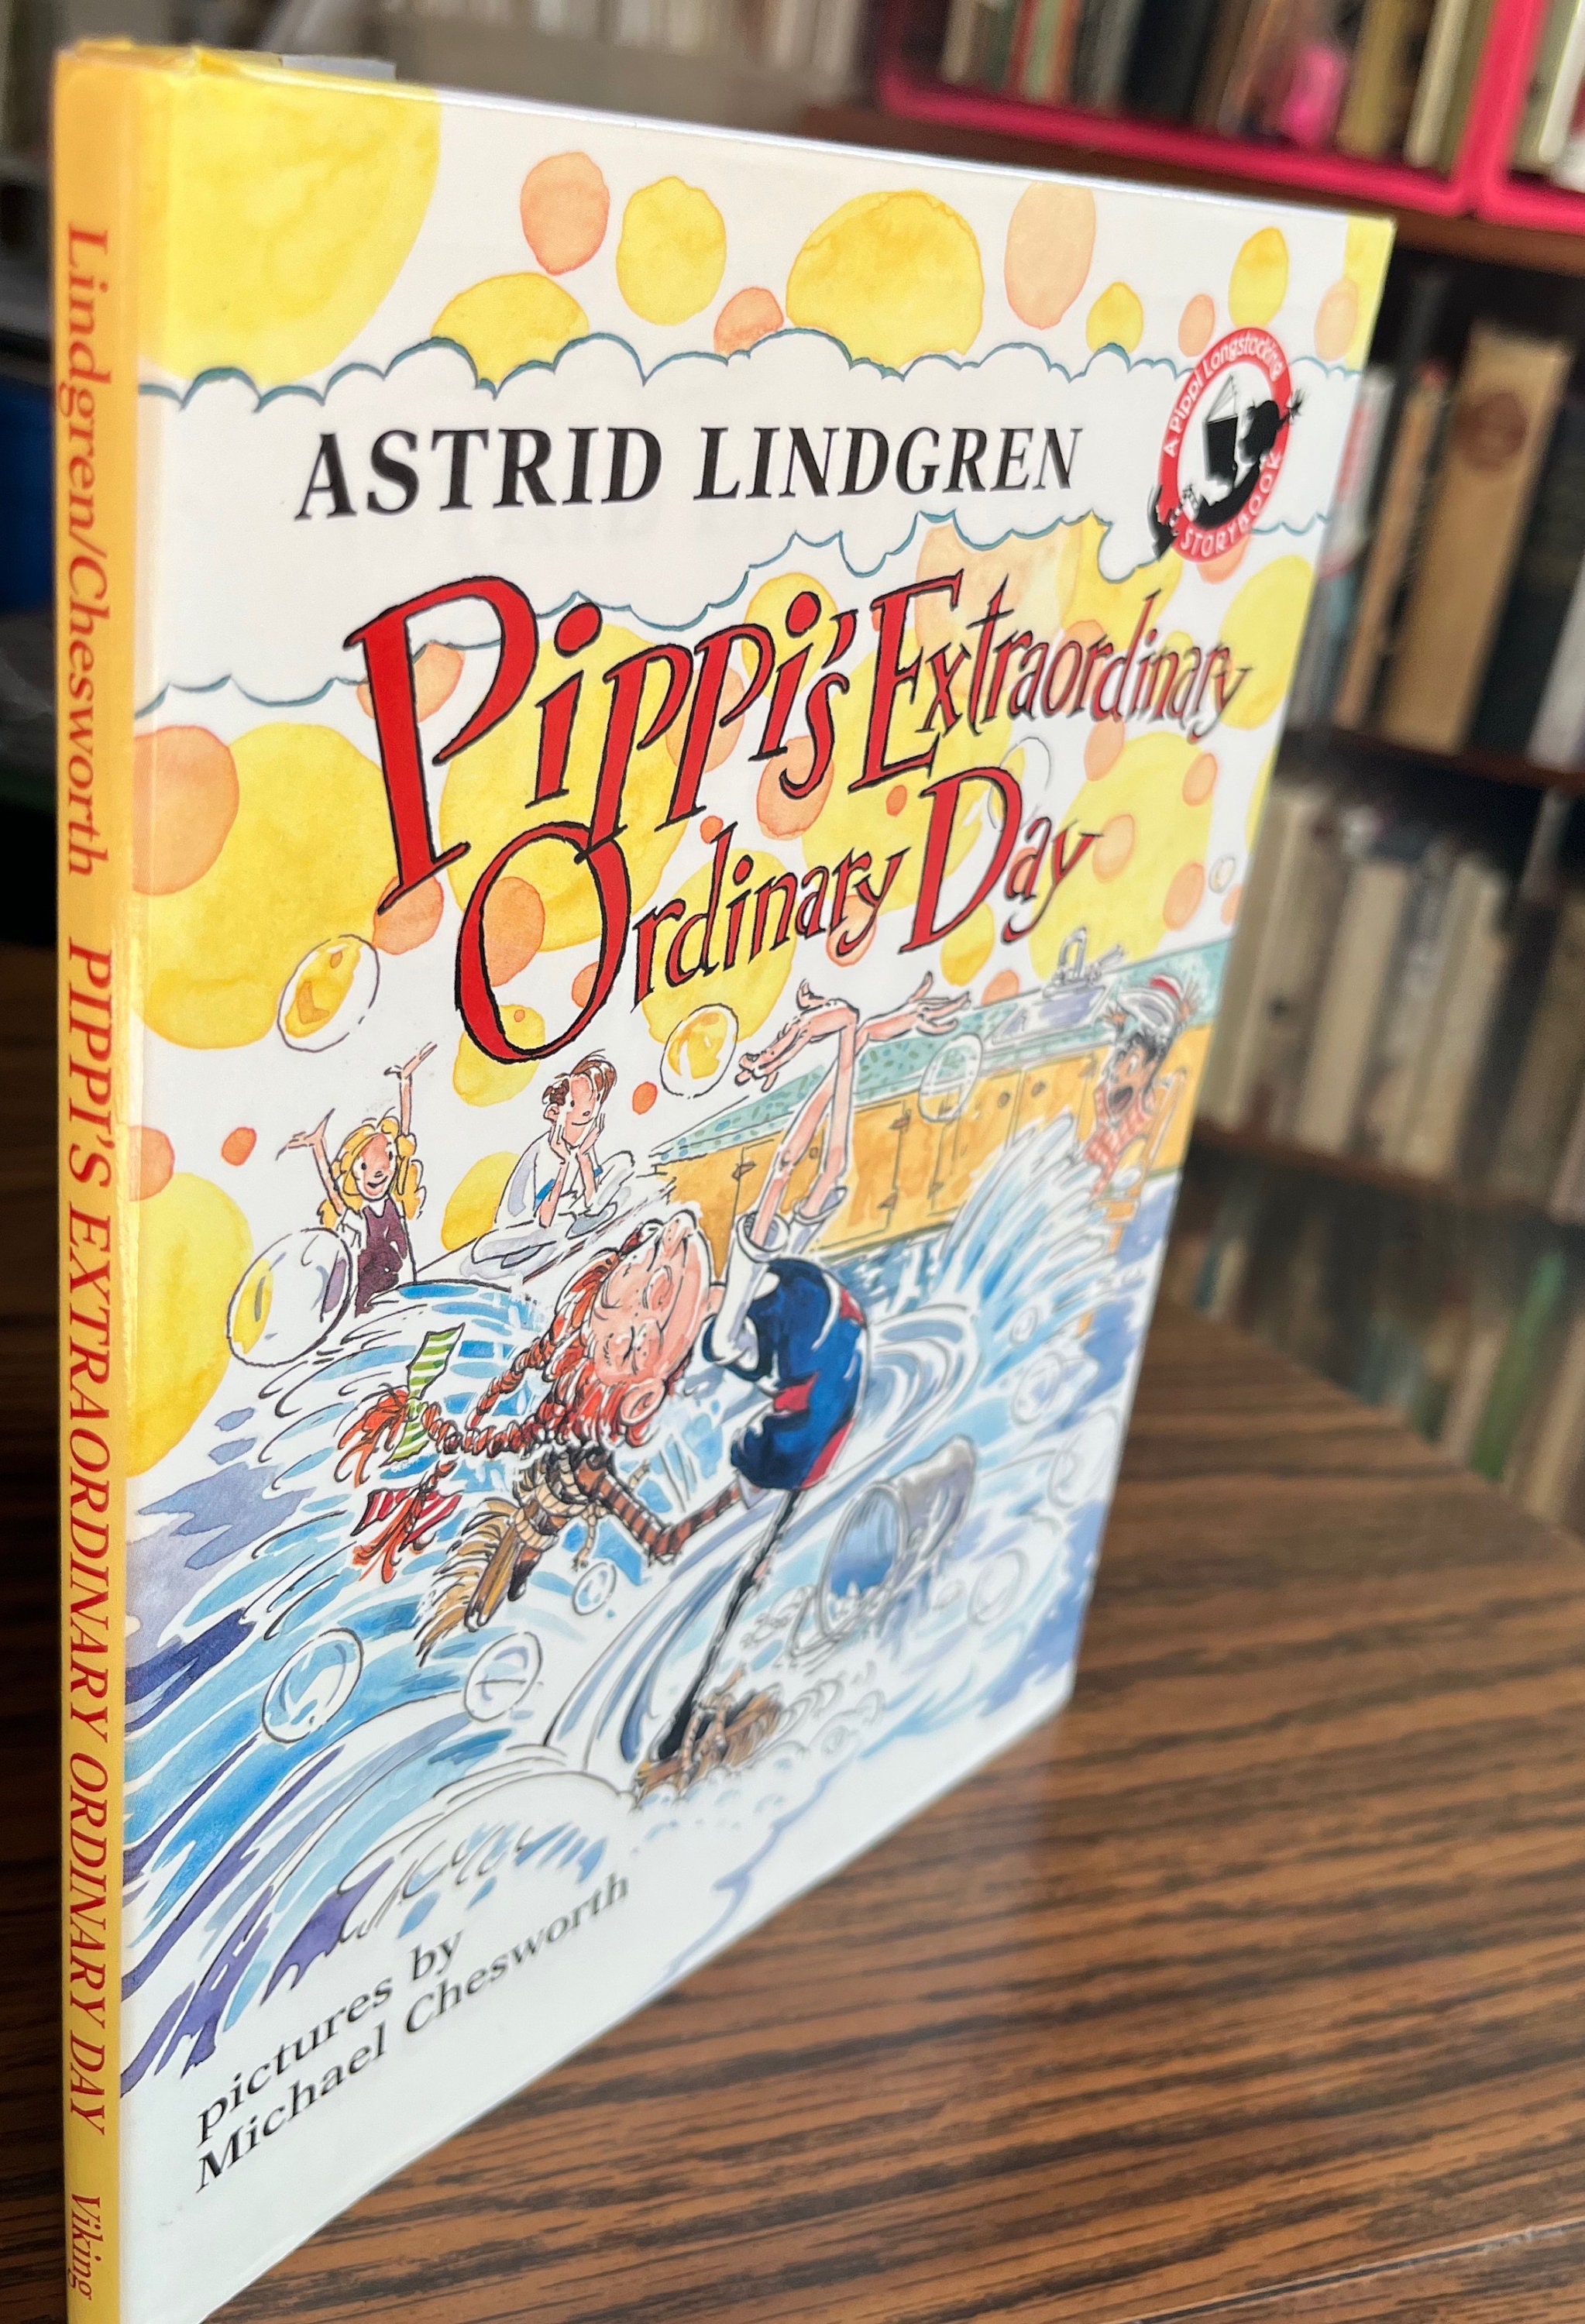 Astrid LINDGREN: used books, rare books and new books (page 12) @